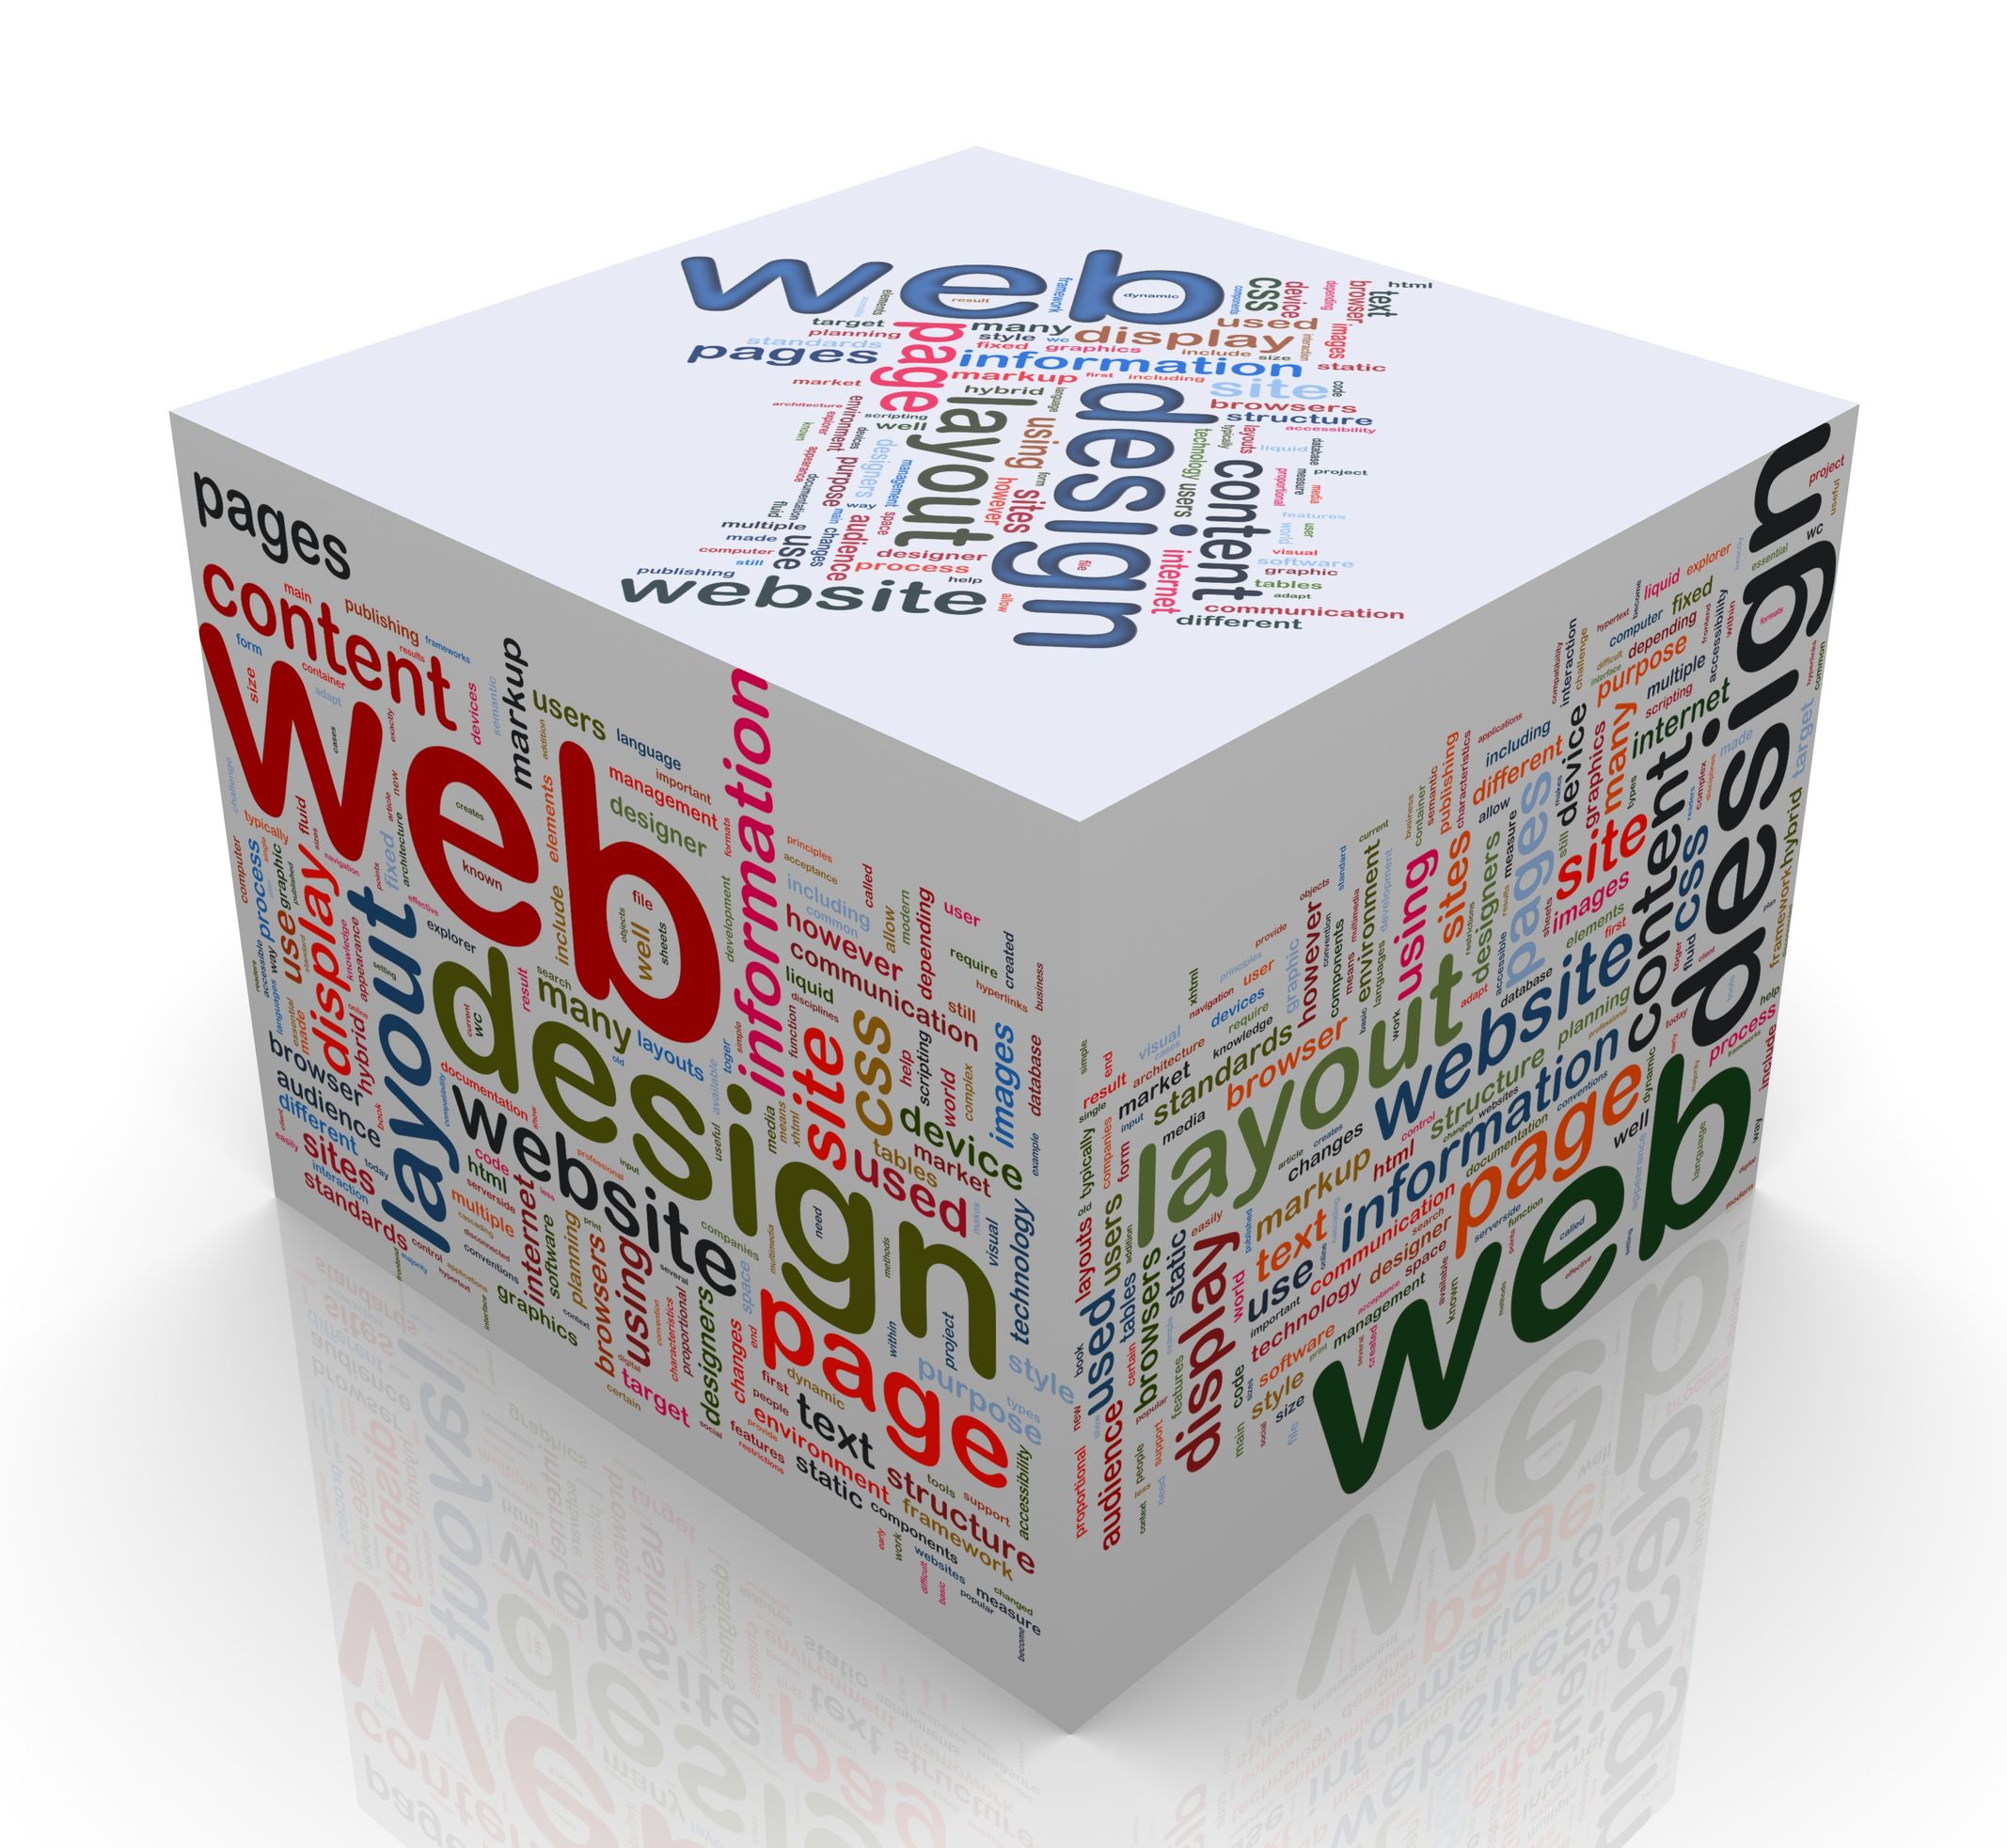 Three Convincing Reasons to Consult With a Web Design Agency